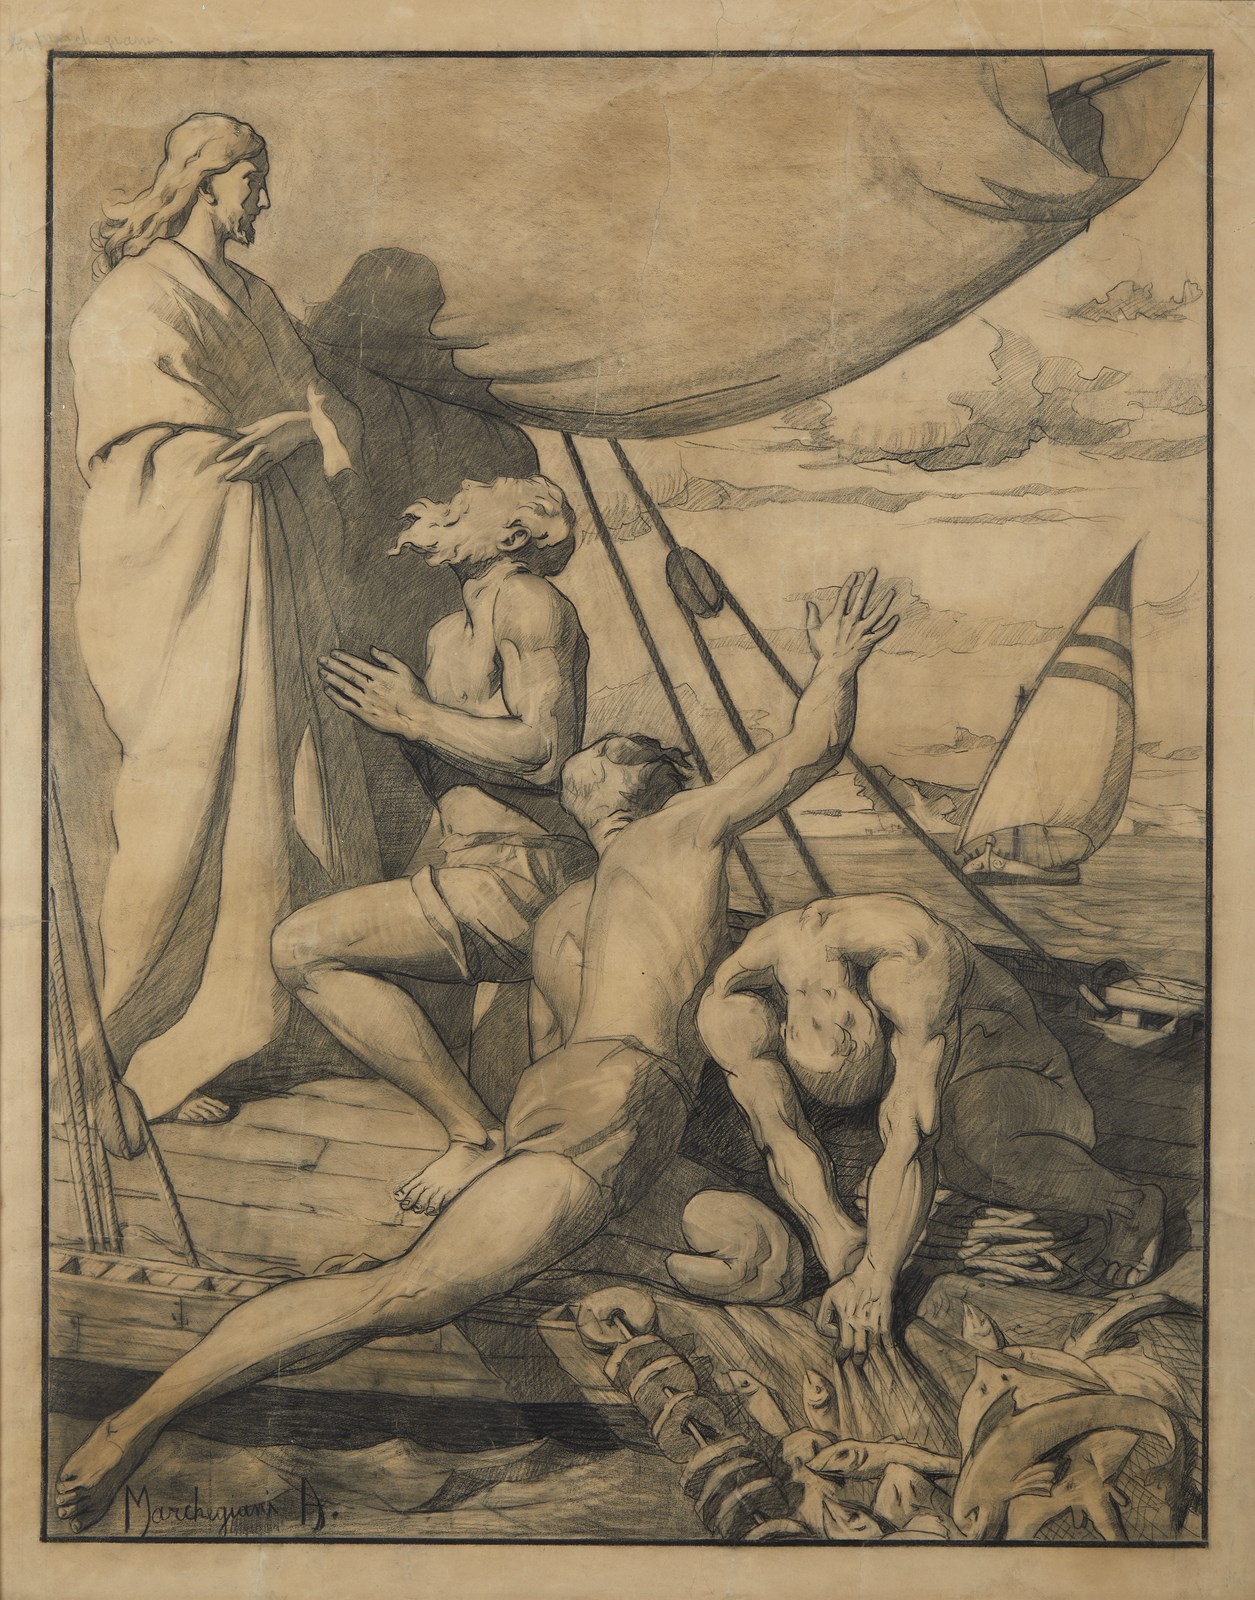 Christ preaches from Peter's boat on Lake Tiberias (A. Marchegiani (XX Secolo))